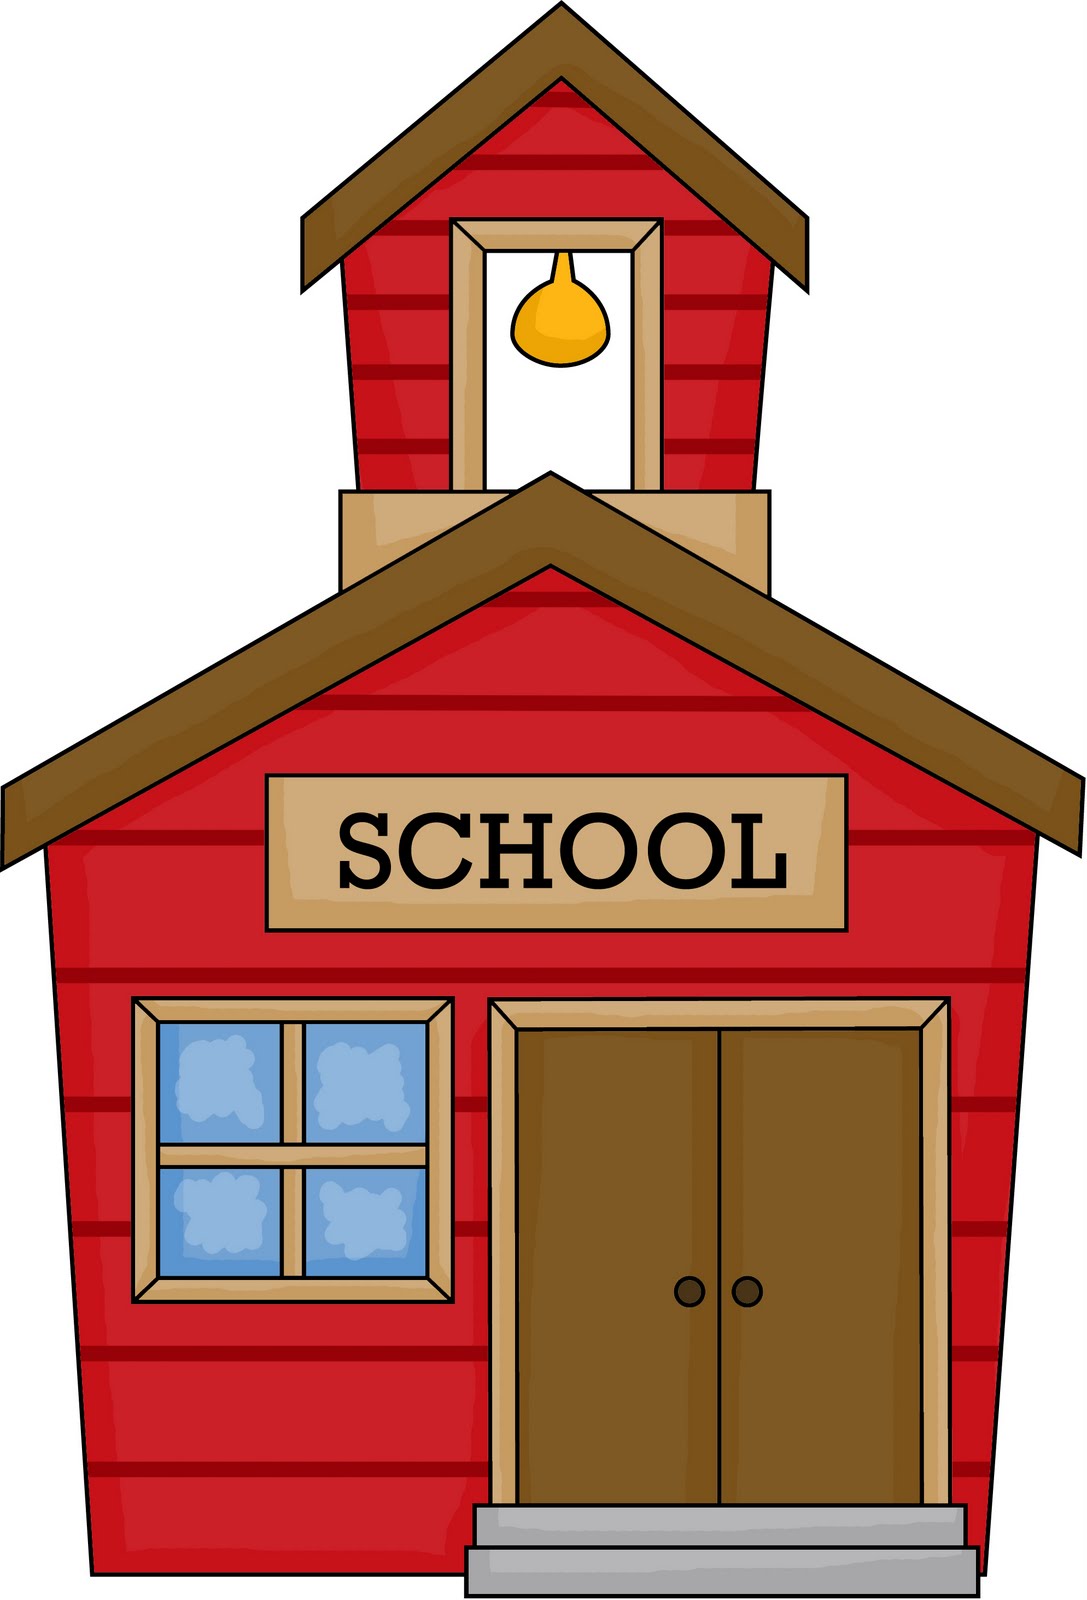 School House Clipart Free   Clipart Panda   Free Clipart Images